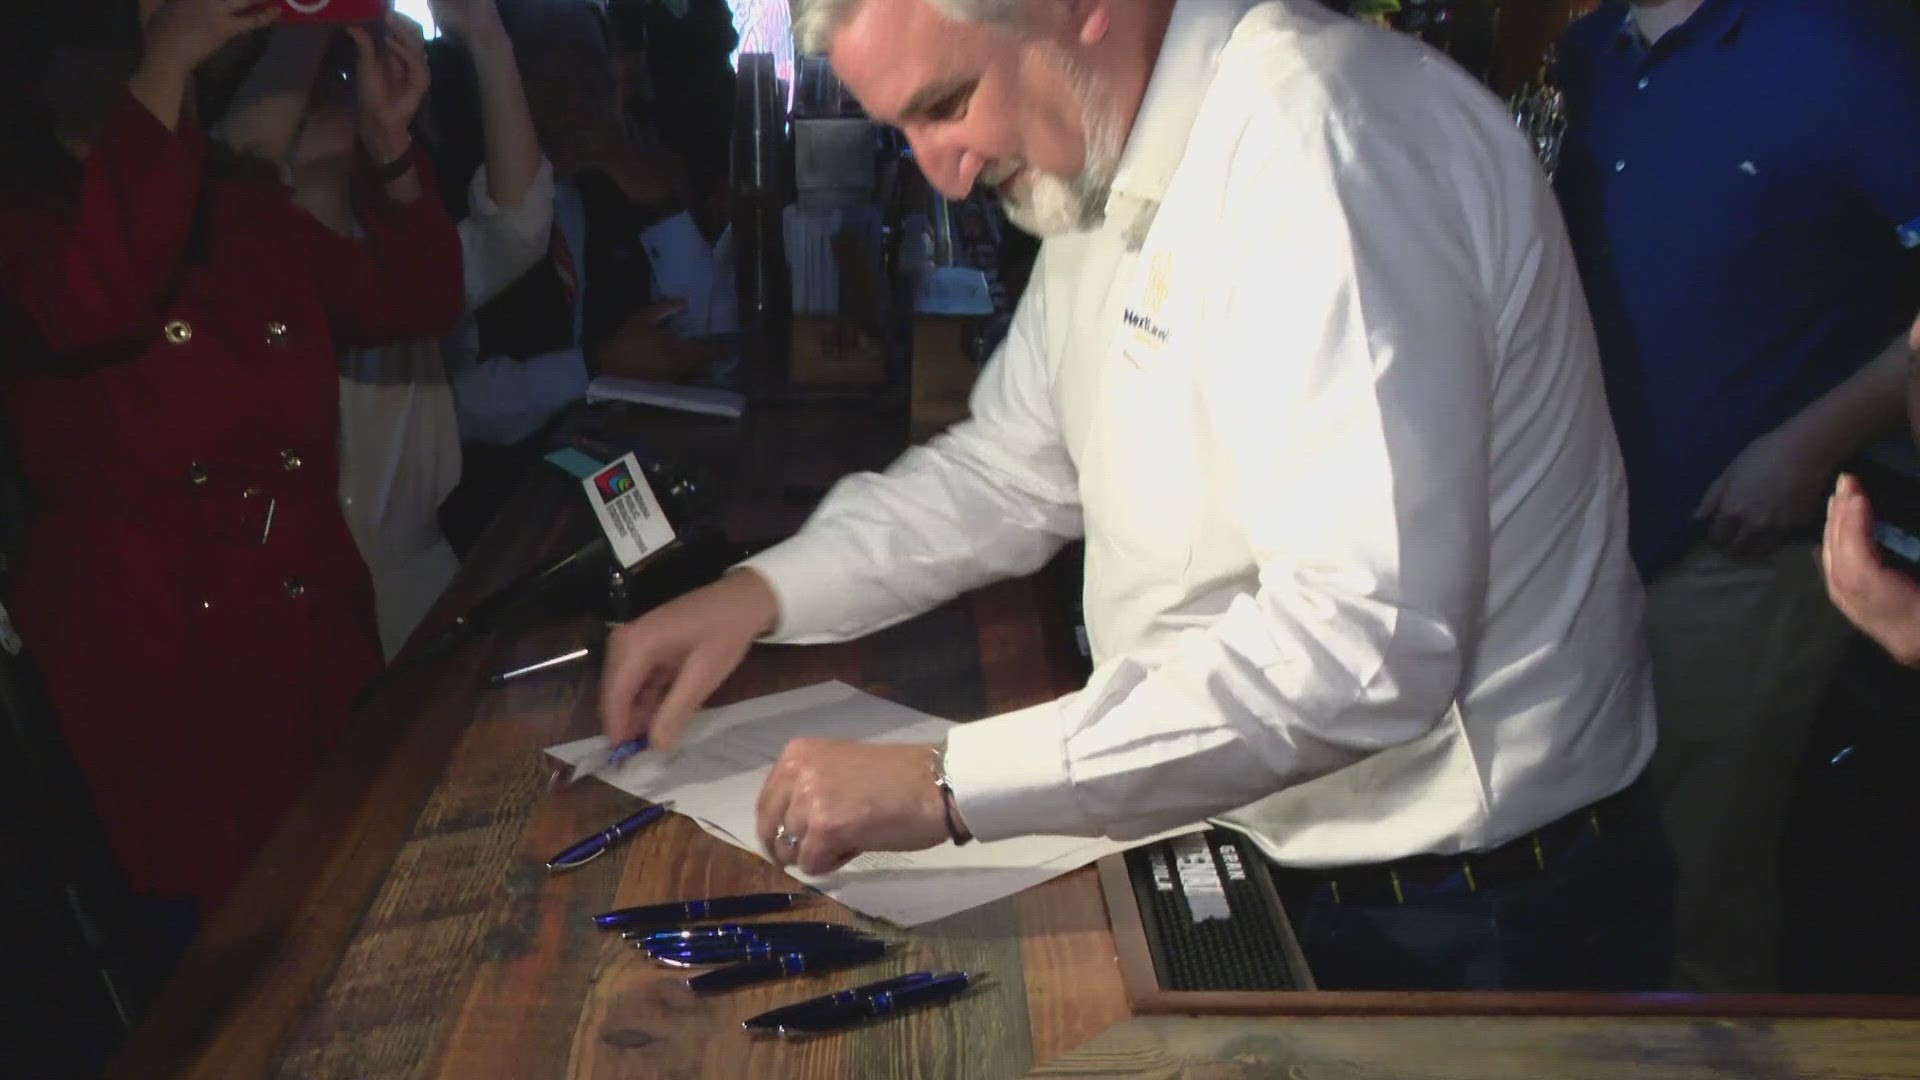 Governor Holcomb signed House Bill 10-86 into law at the Whistle Stop Inn. This law will bring back Happy Hour Drink Specials.